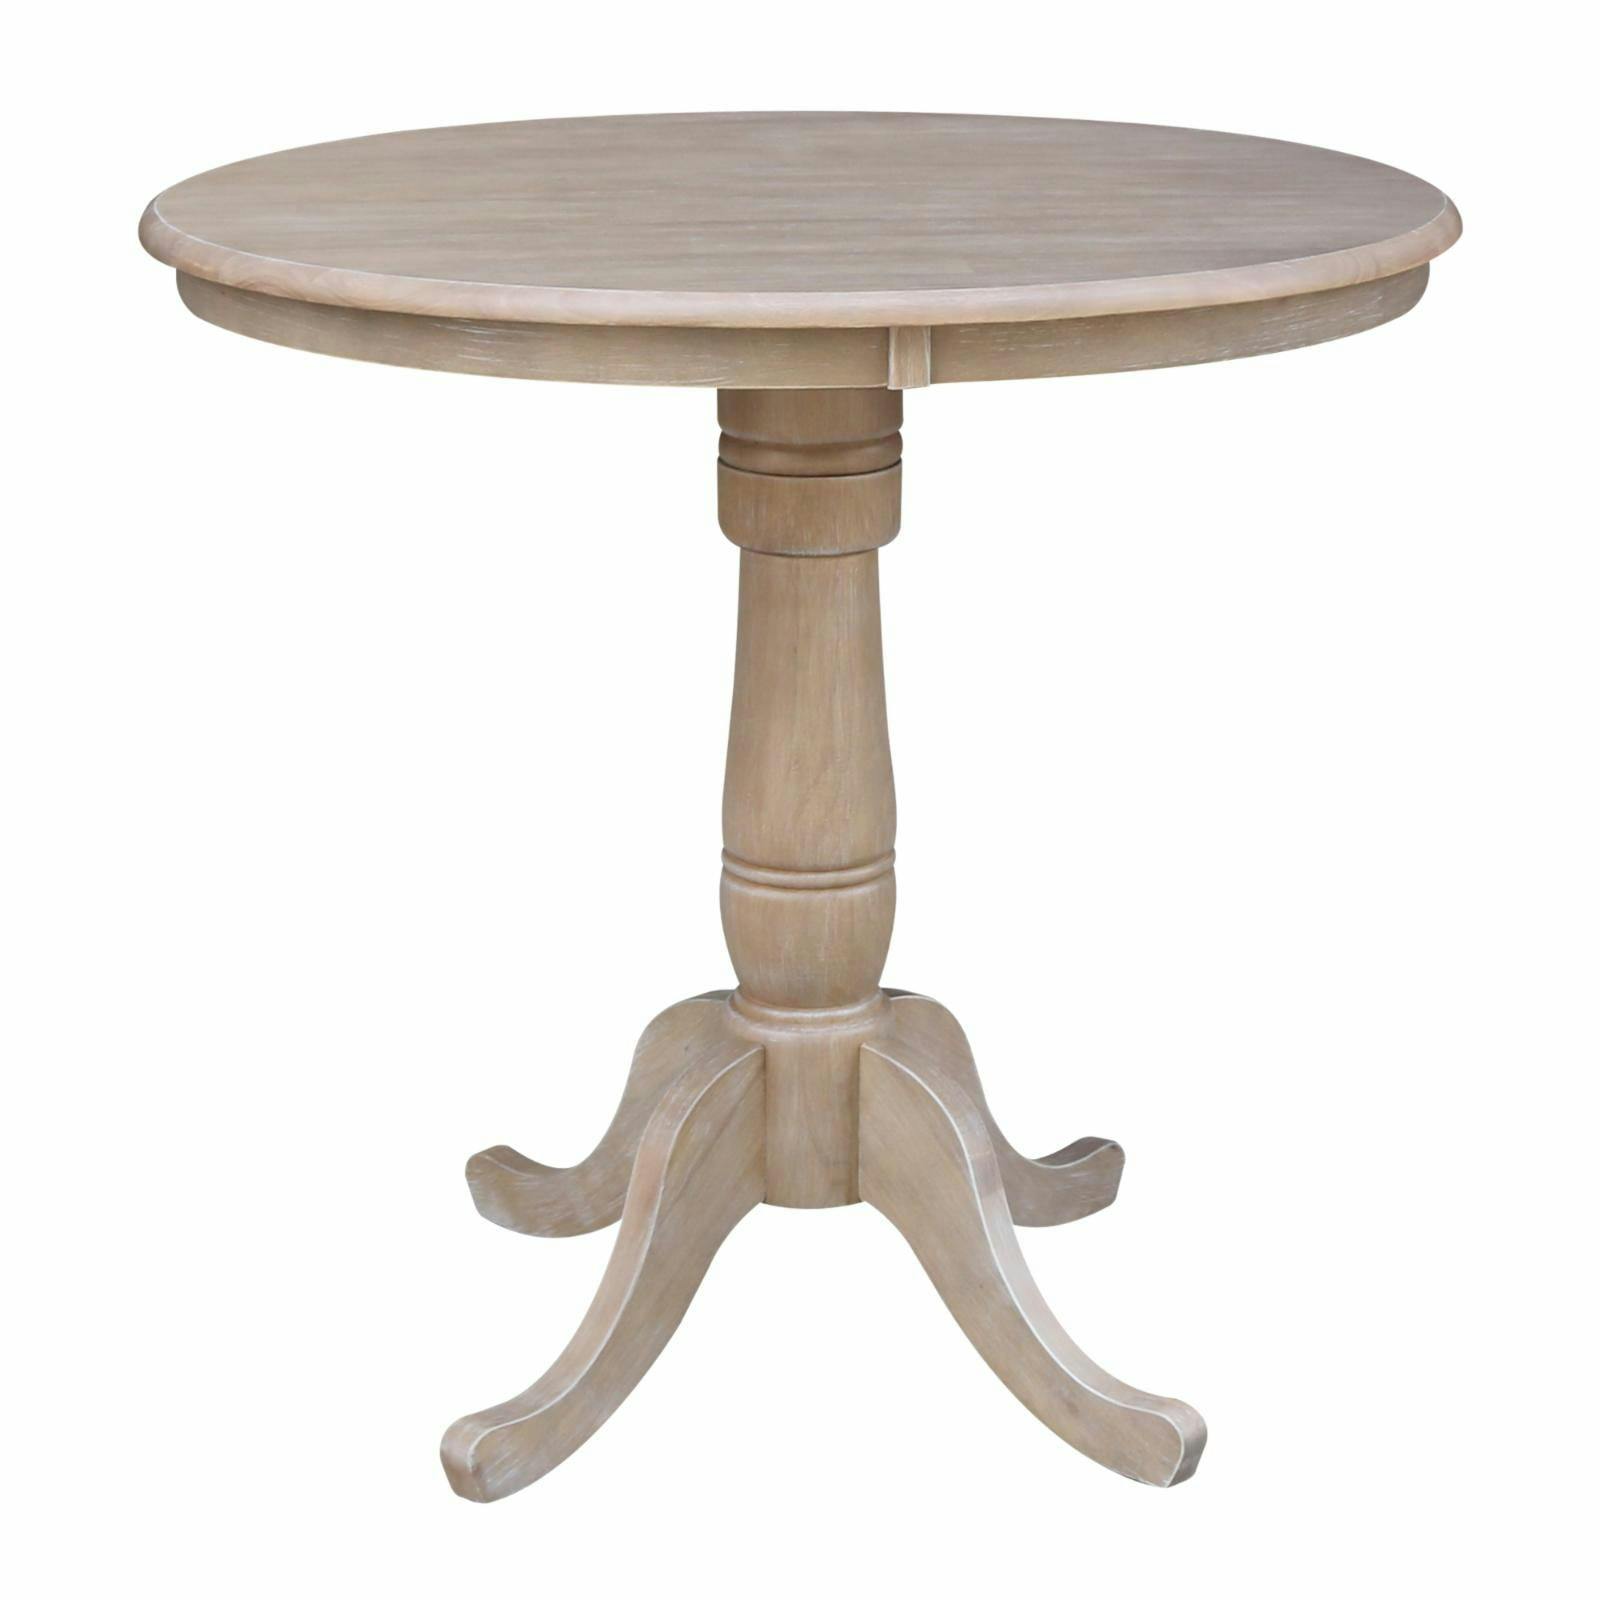 Classic Round 36" Wood Pedestal Counter Height Table in Washed Gray